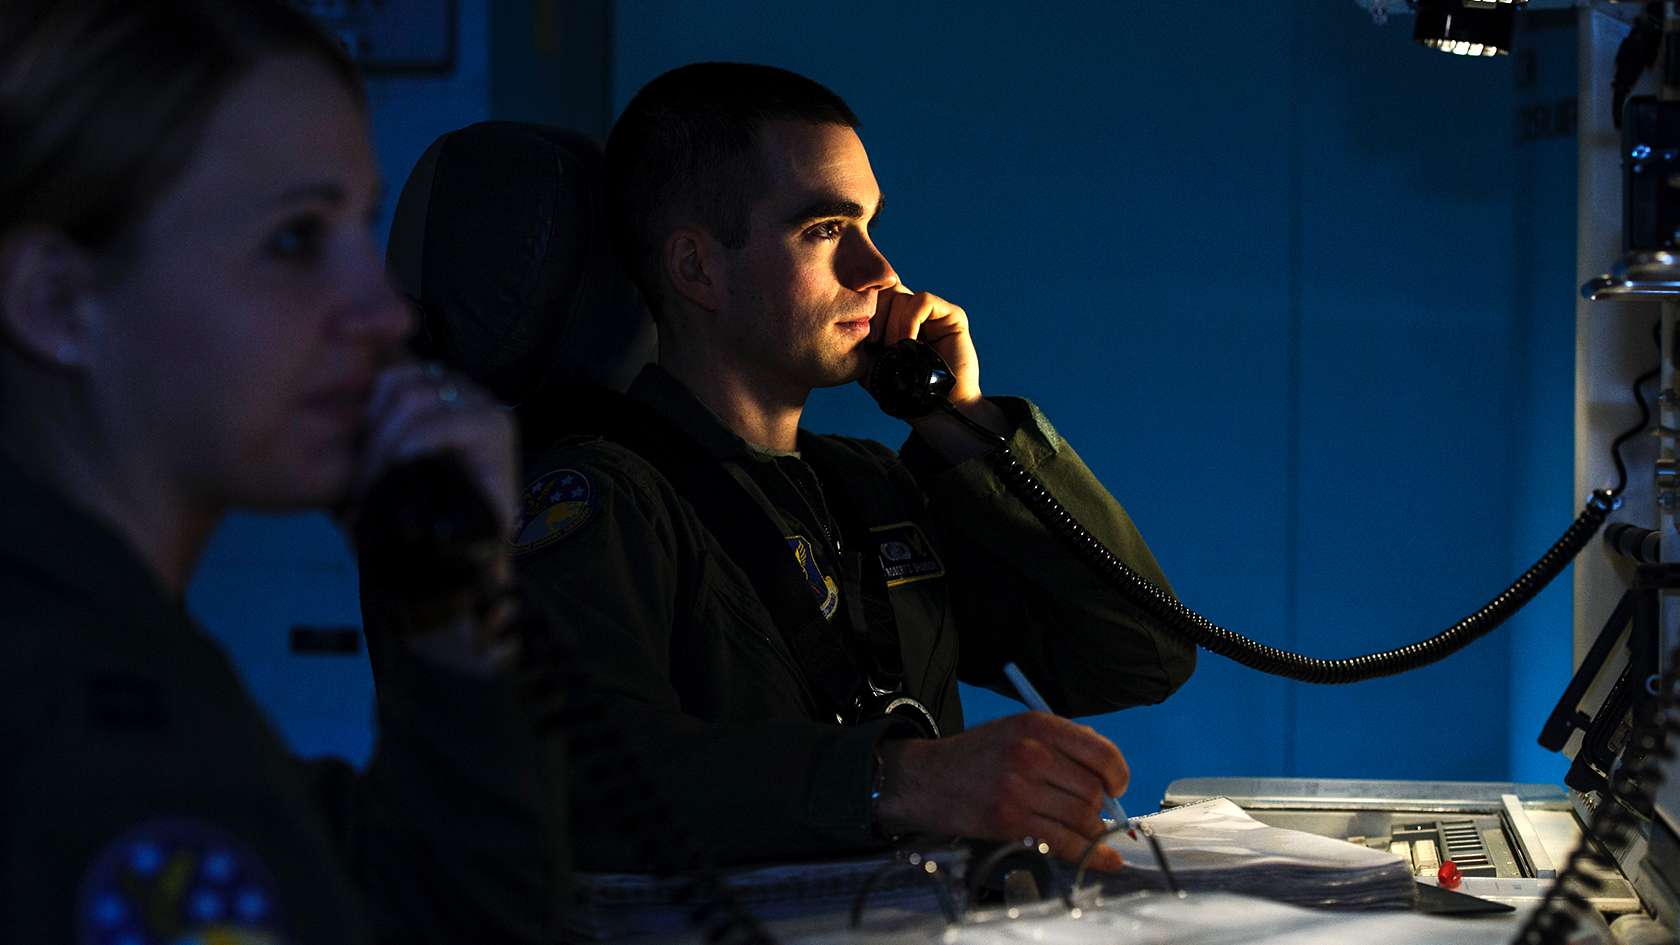 NUCLEAR AND MISSILE OPERATIONS OFFICER ON PHONE